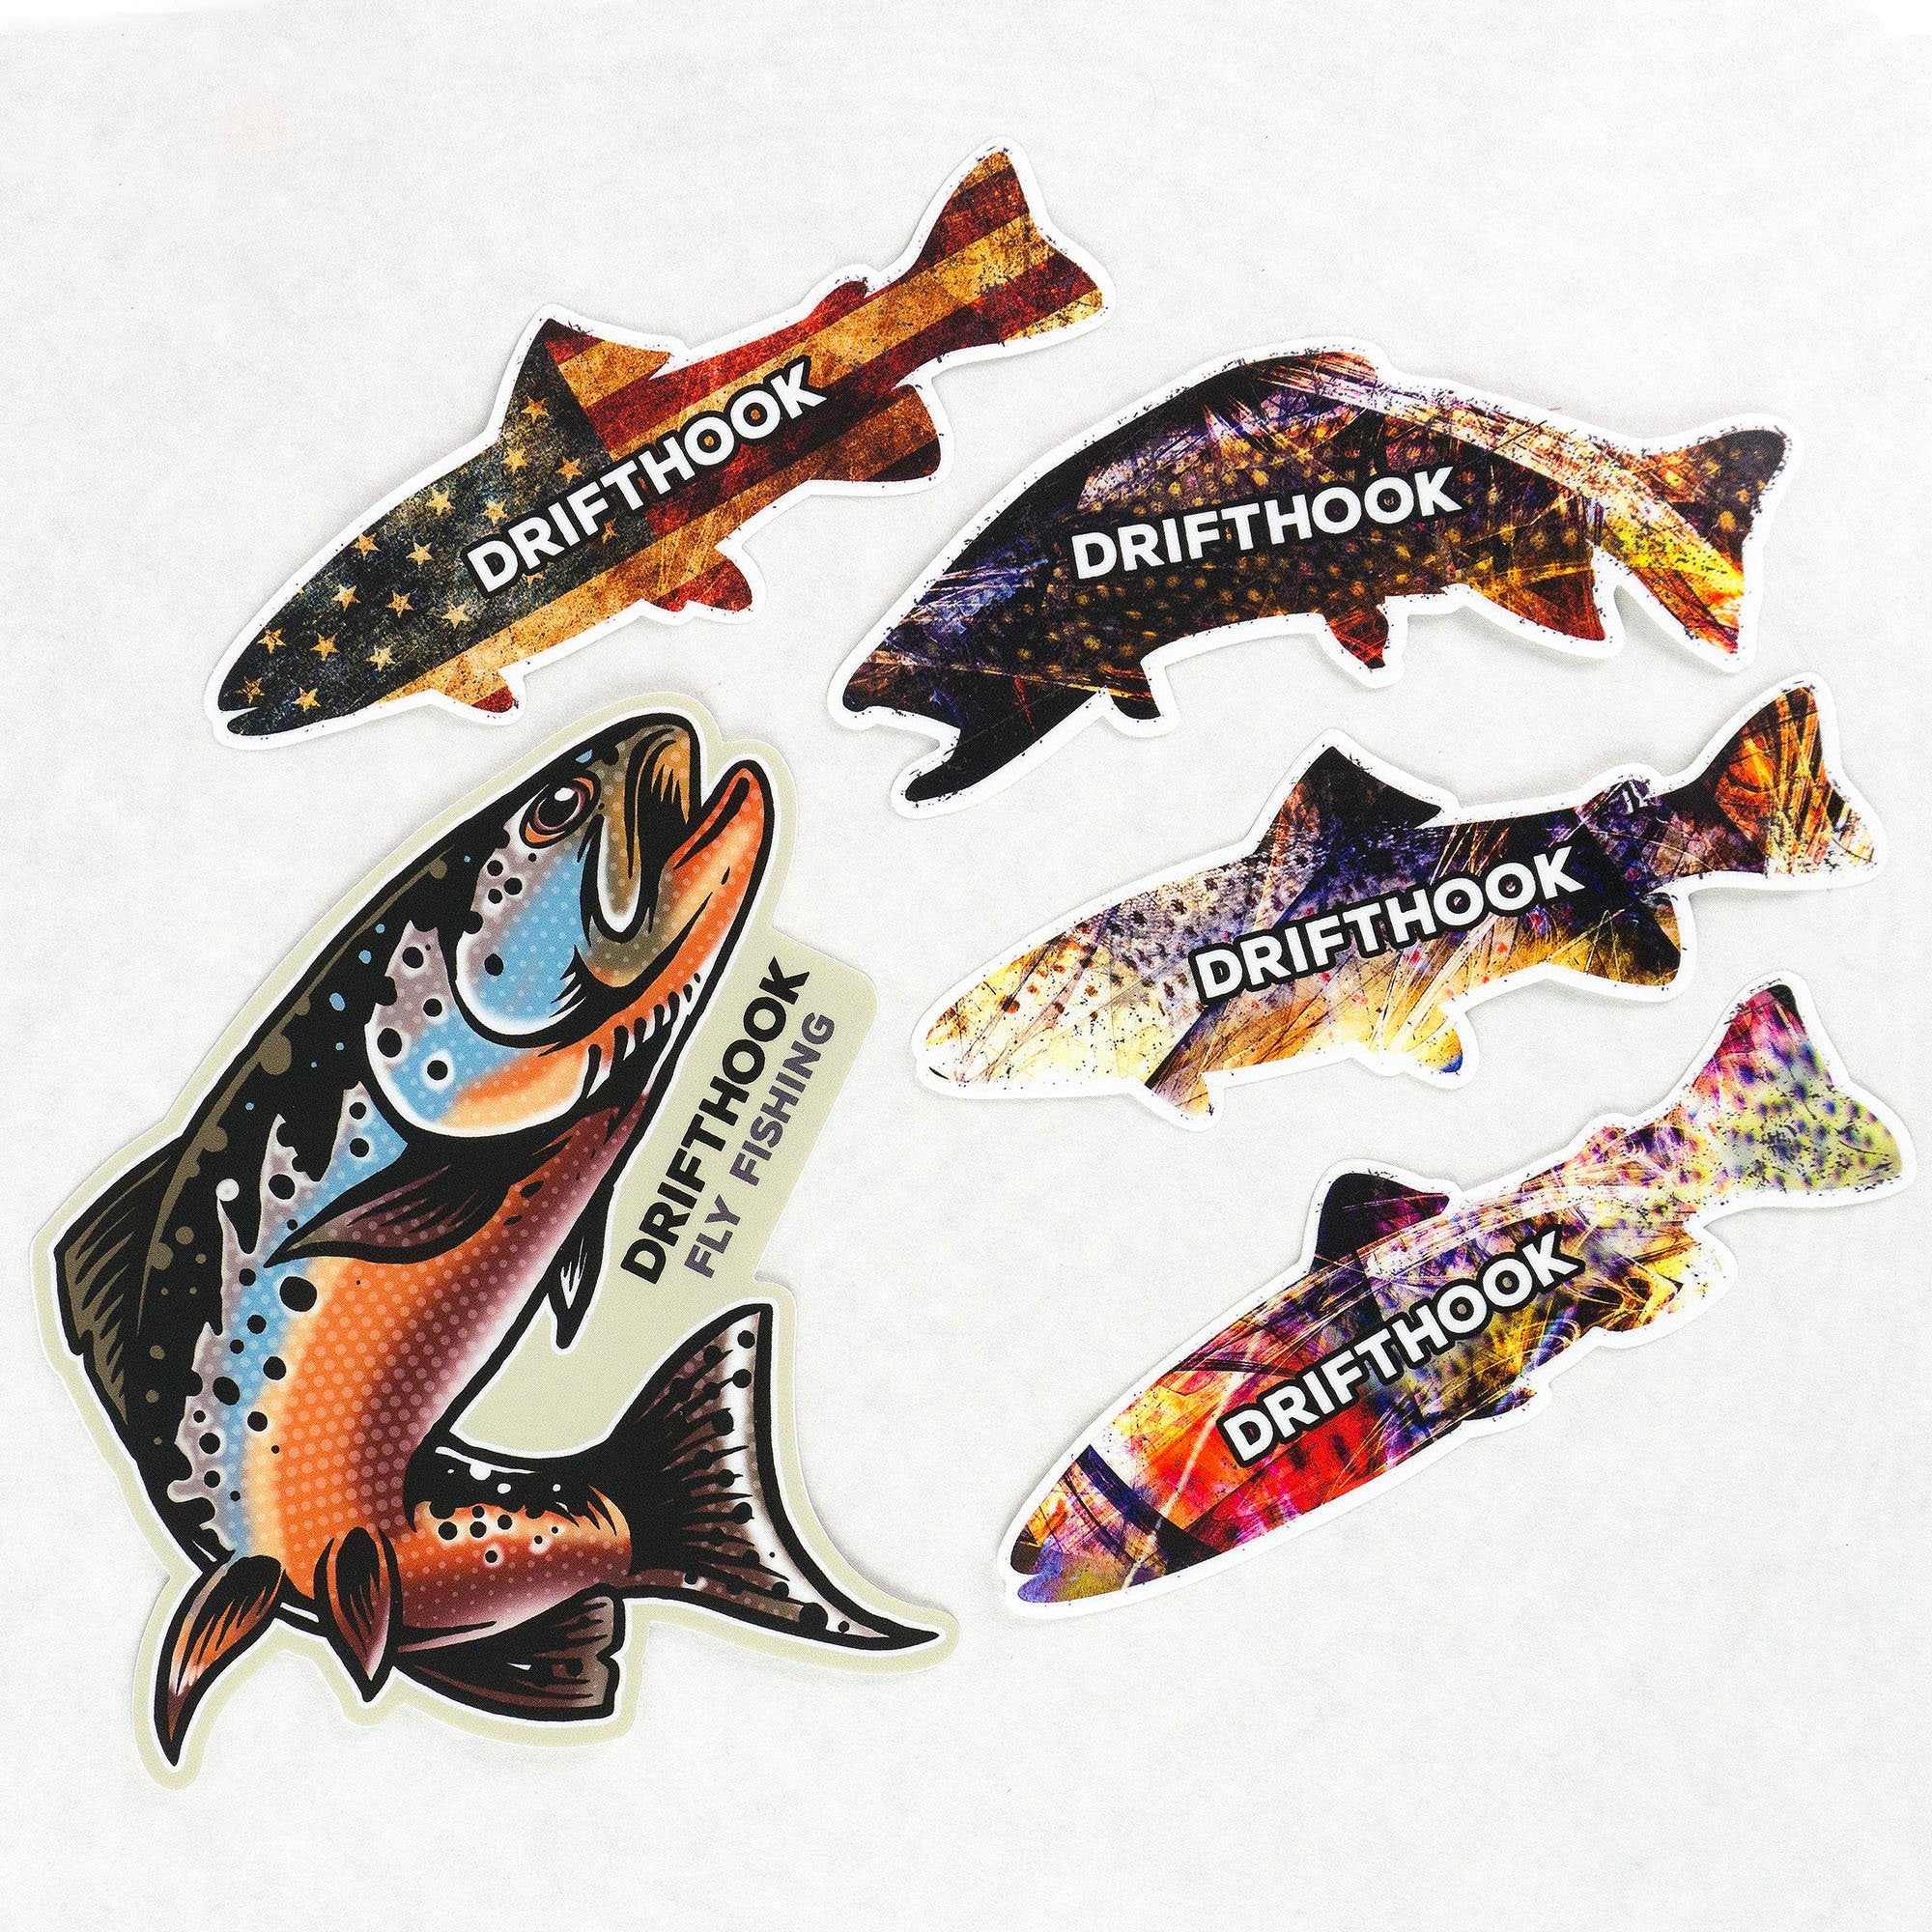 Fisch - Perch - fishing fish - tawny- Patch - Back Patches - Patch  Keychains Stickers -  - Biggest Patch Shop worldwide